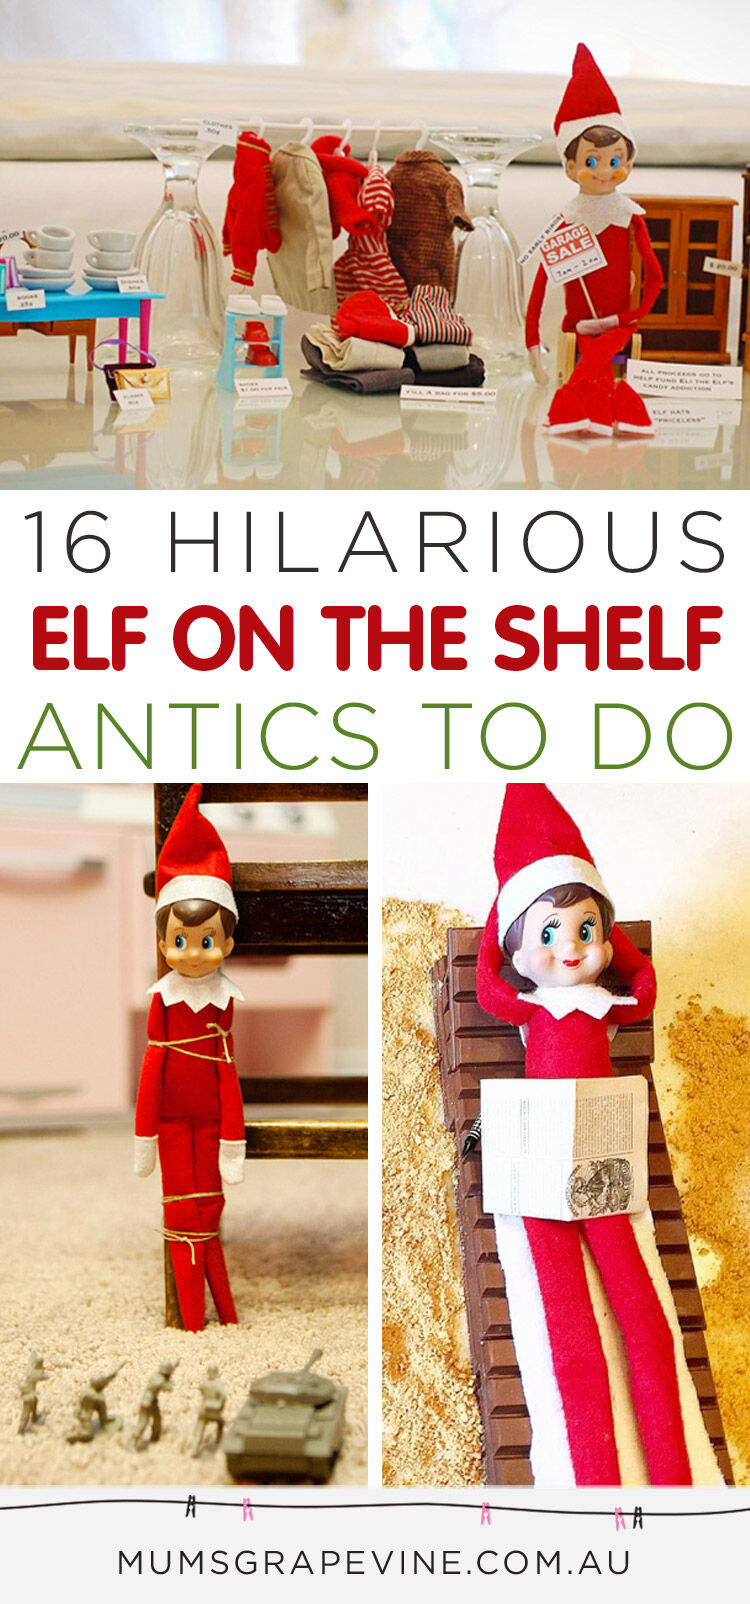 More hilarious Elf on the Shelf antics to stage